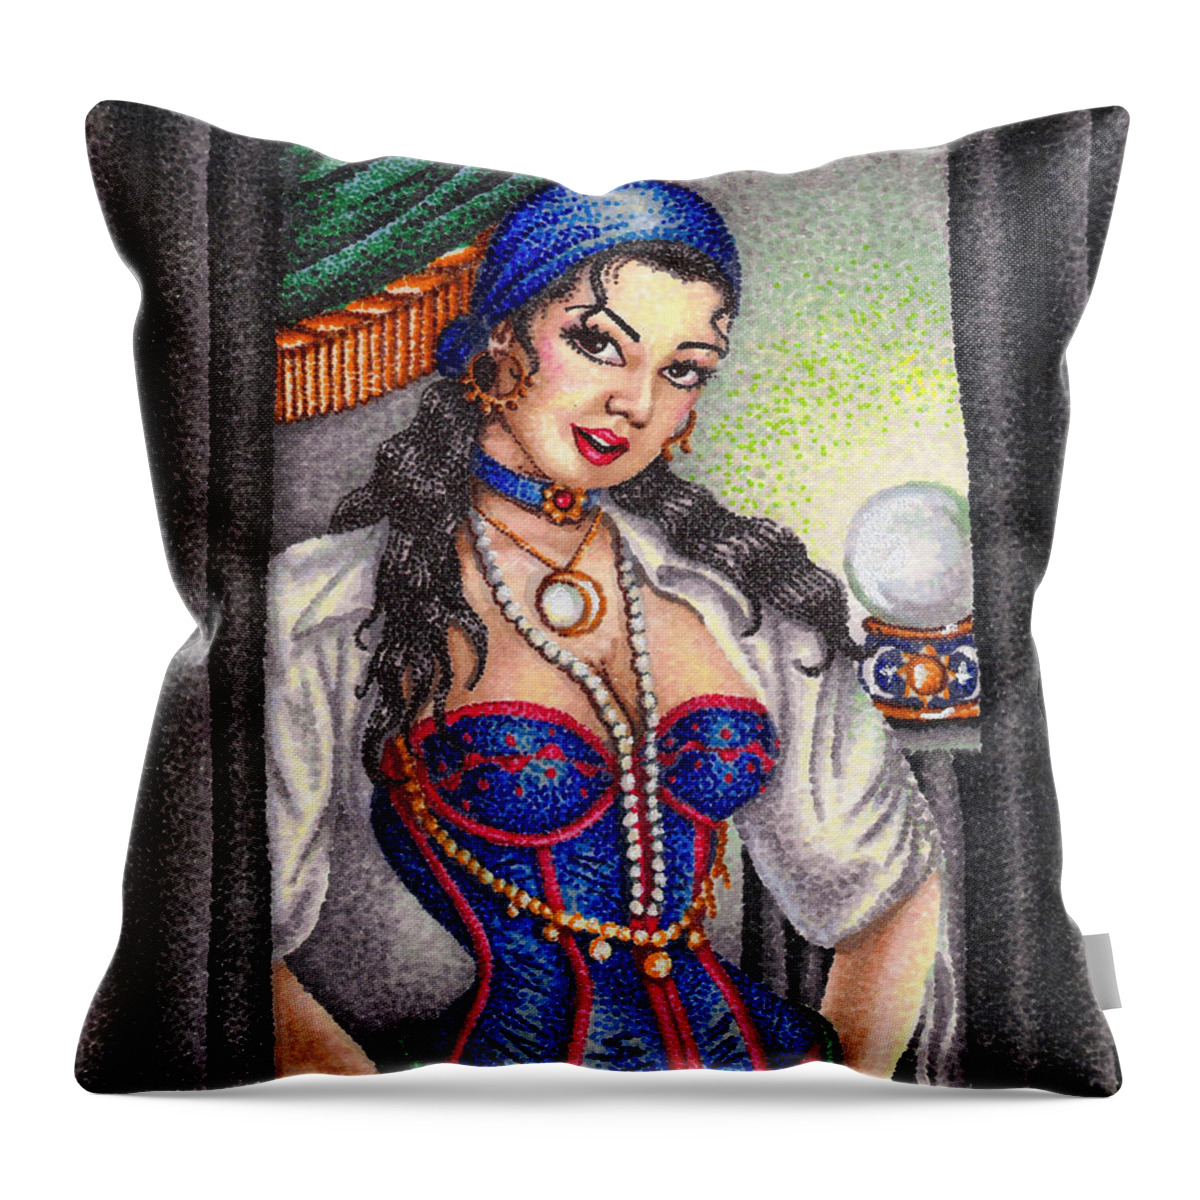 Woman Throw Pillow featuring the drawing Fortune Teller by Scarlett Royale